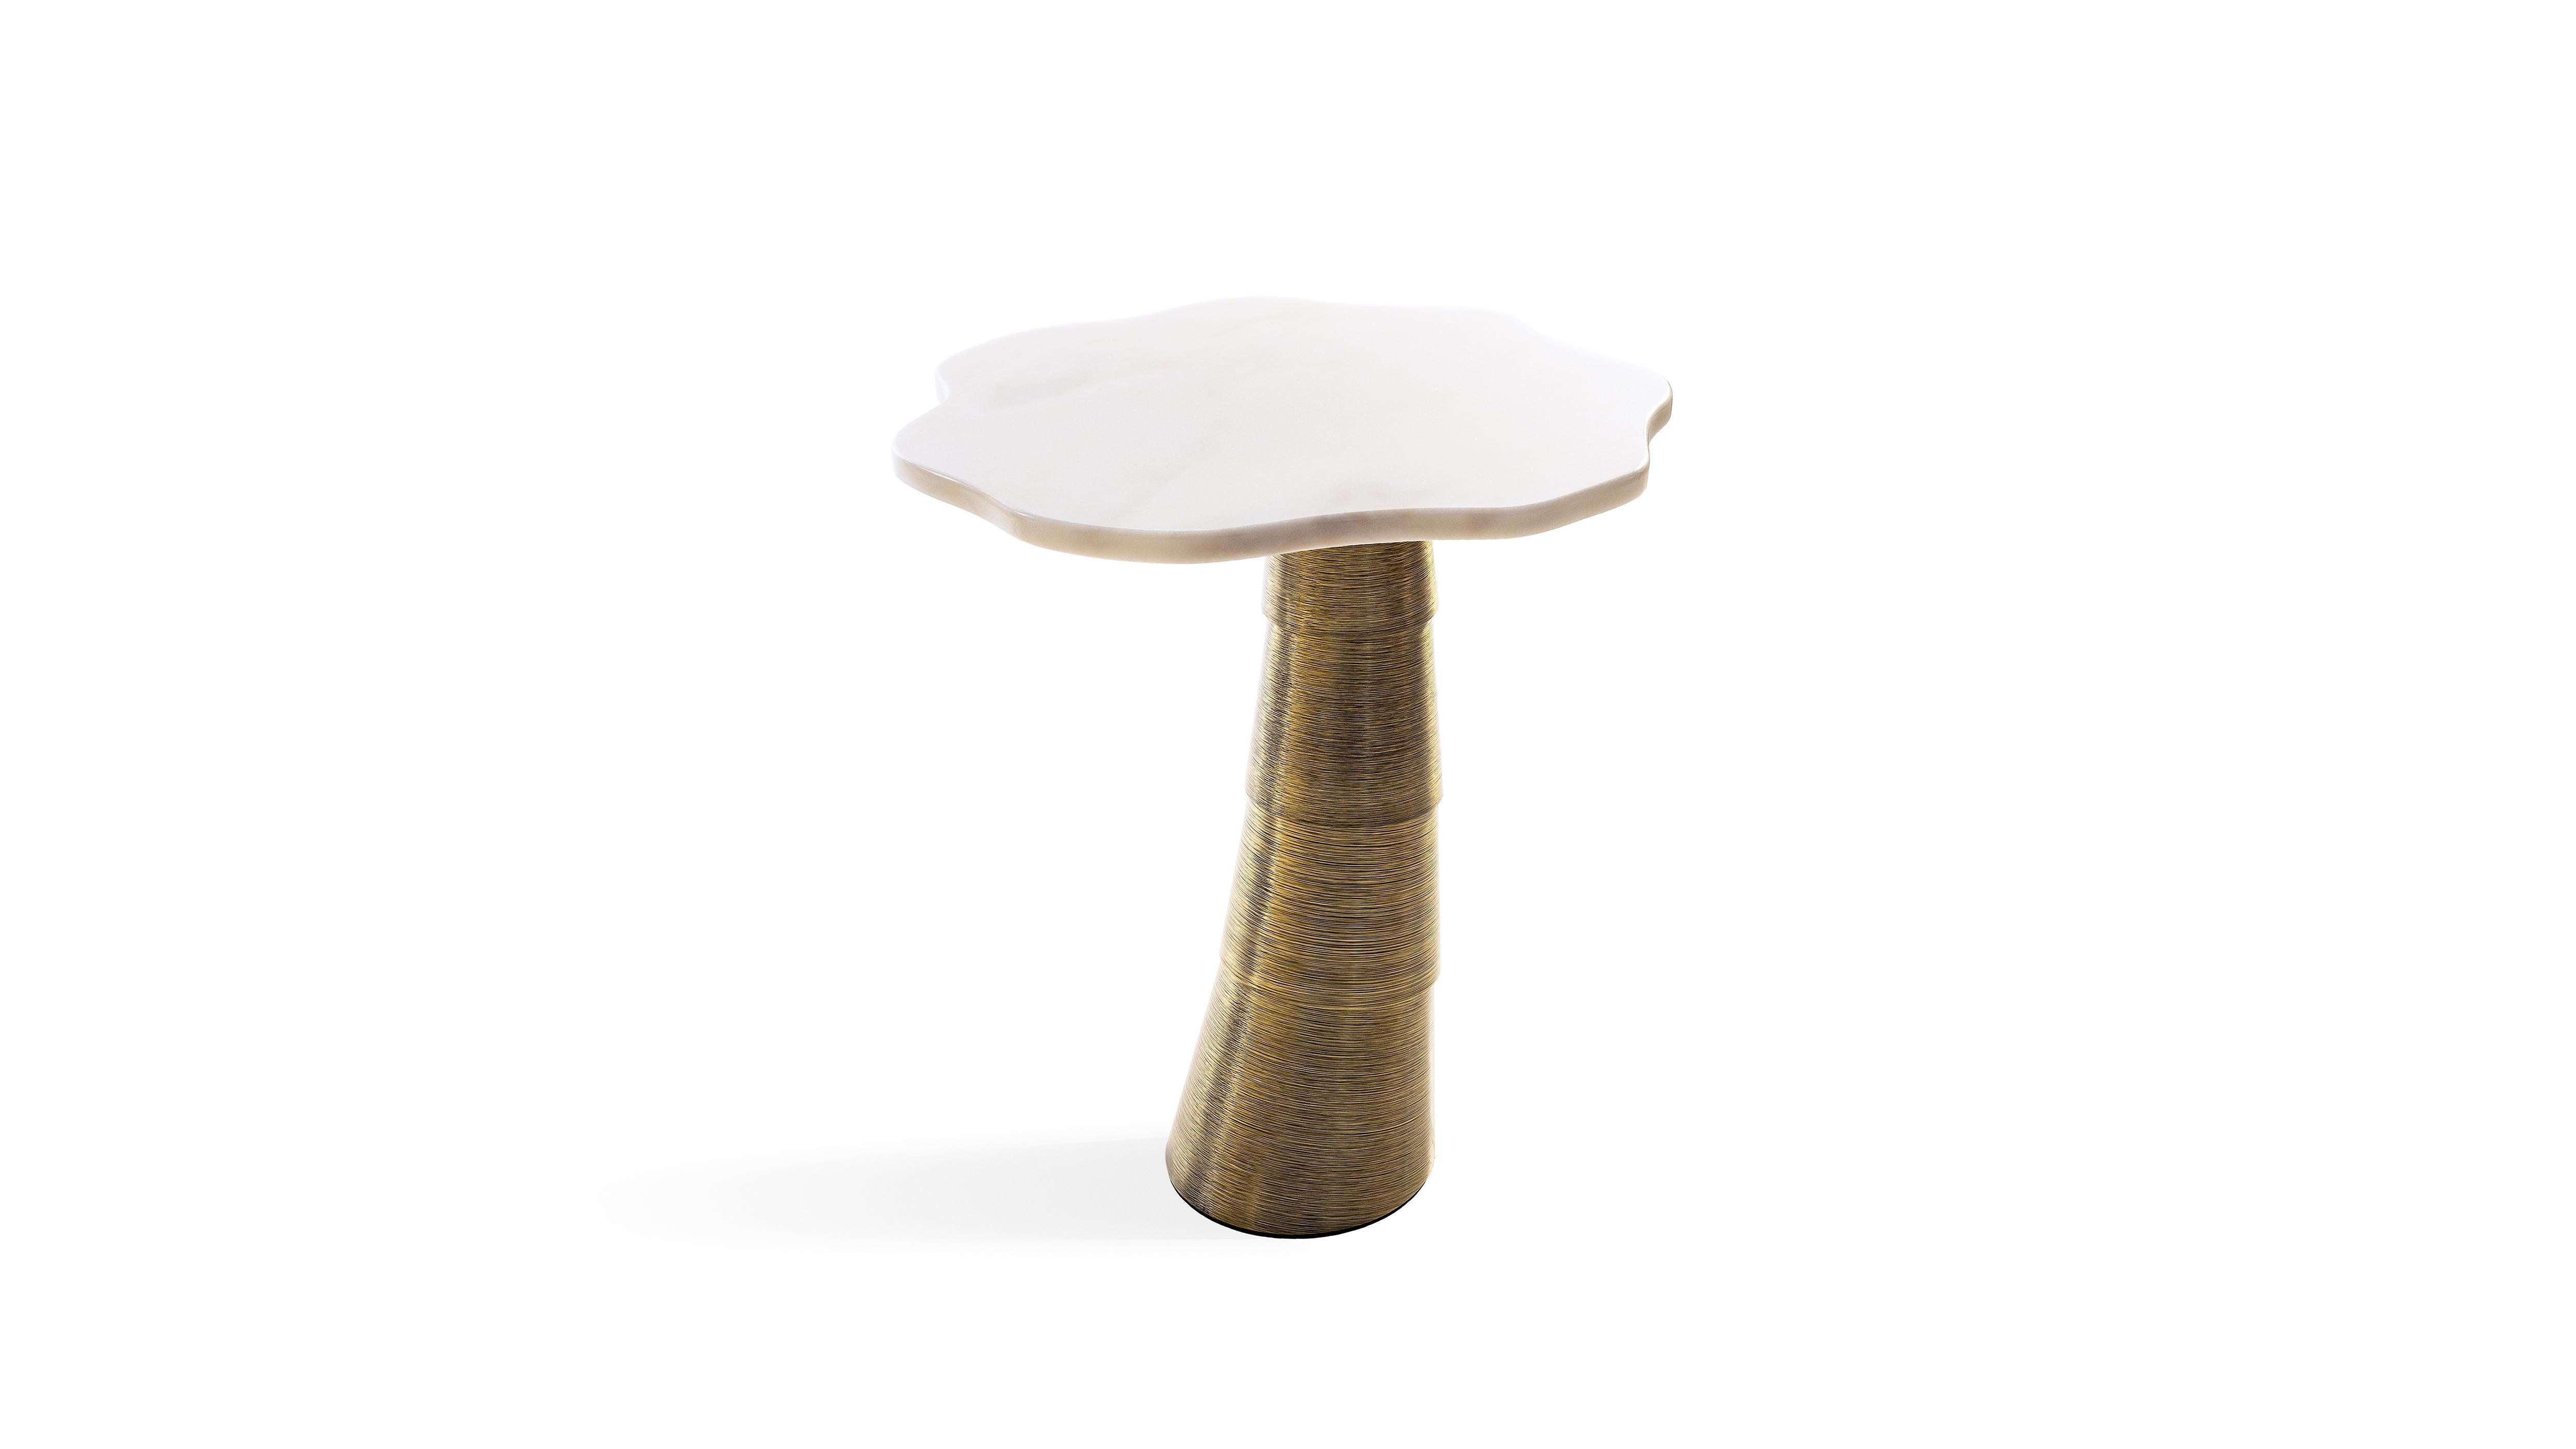 Palm Estremoz Marble Side Table by InsidherLand
Dimensions: D 50 x W 50 x H 60 cm.
Materials: Estremoz marble, brass with patinated effect.
22 kg.
Other marbles available.

The Palm side table is an exquisite delicate design that combines a